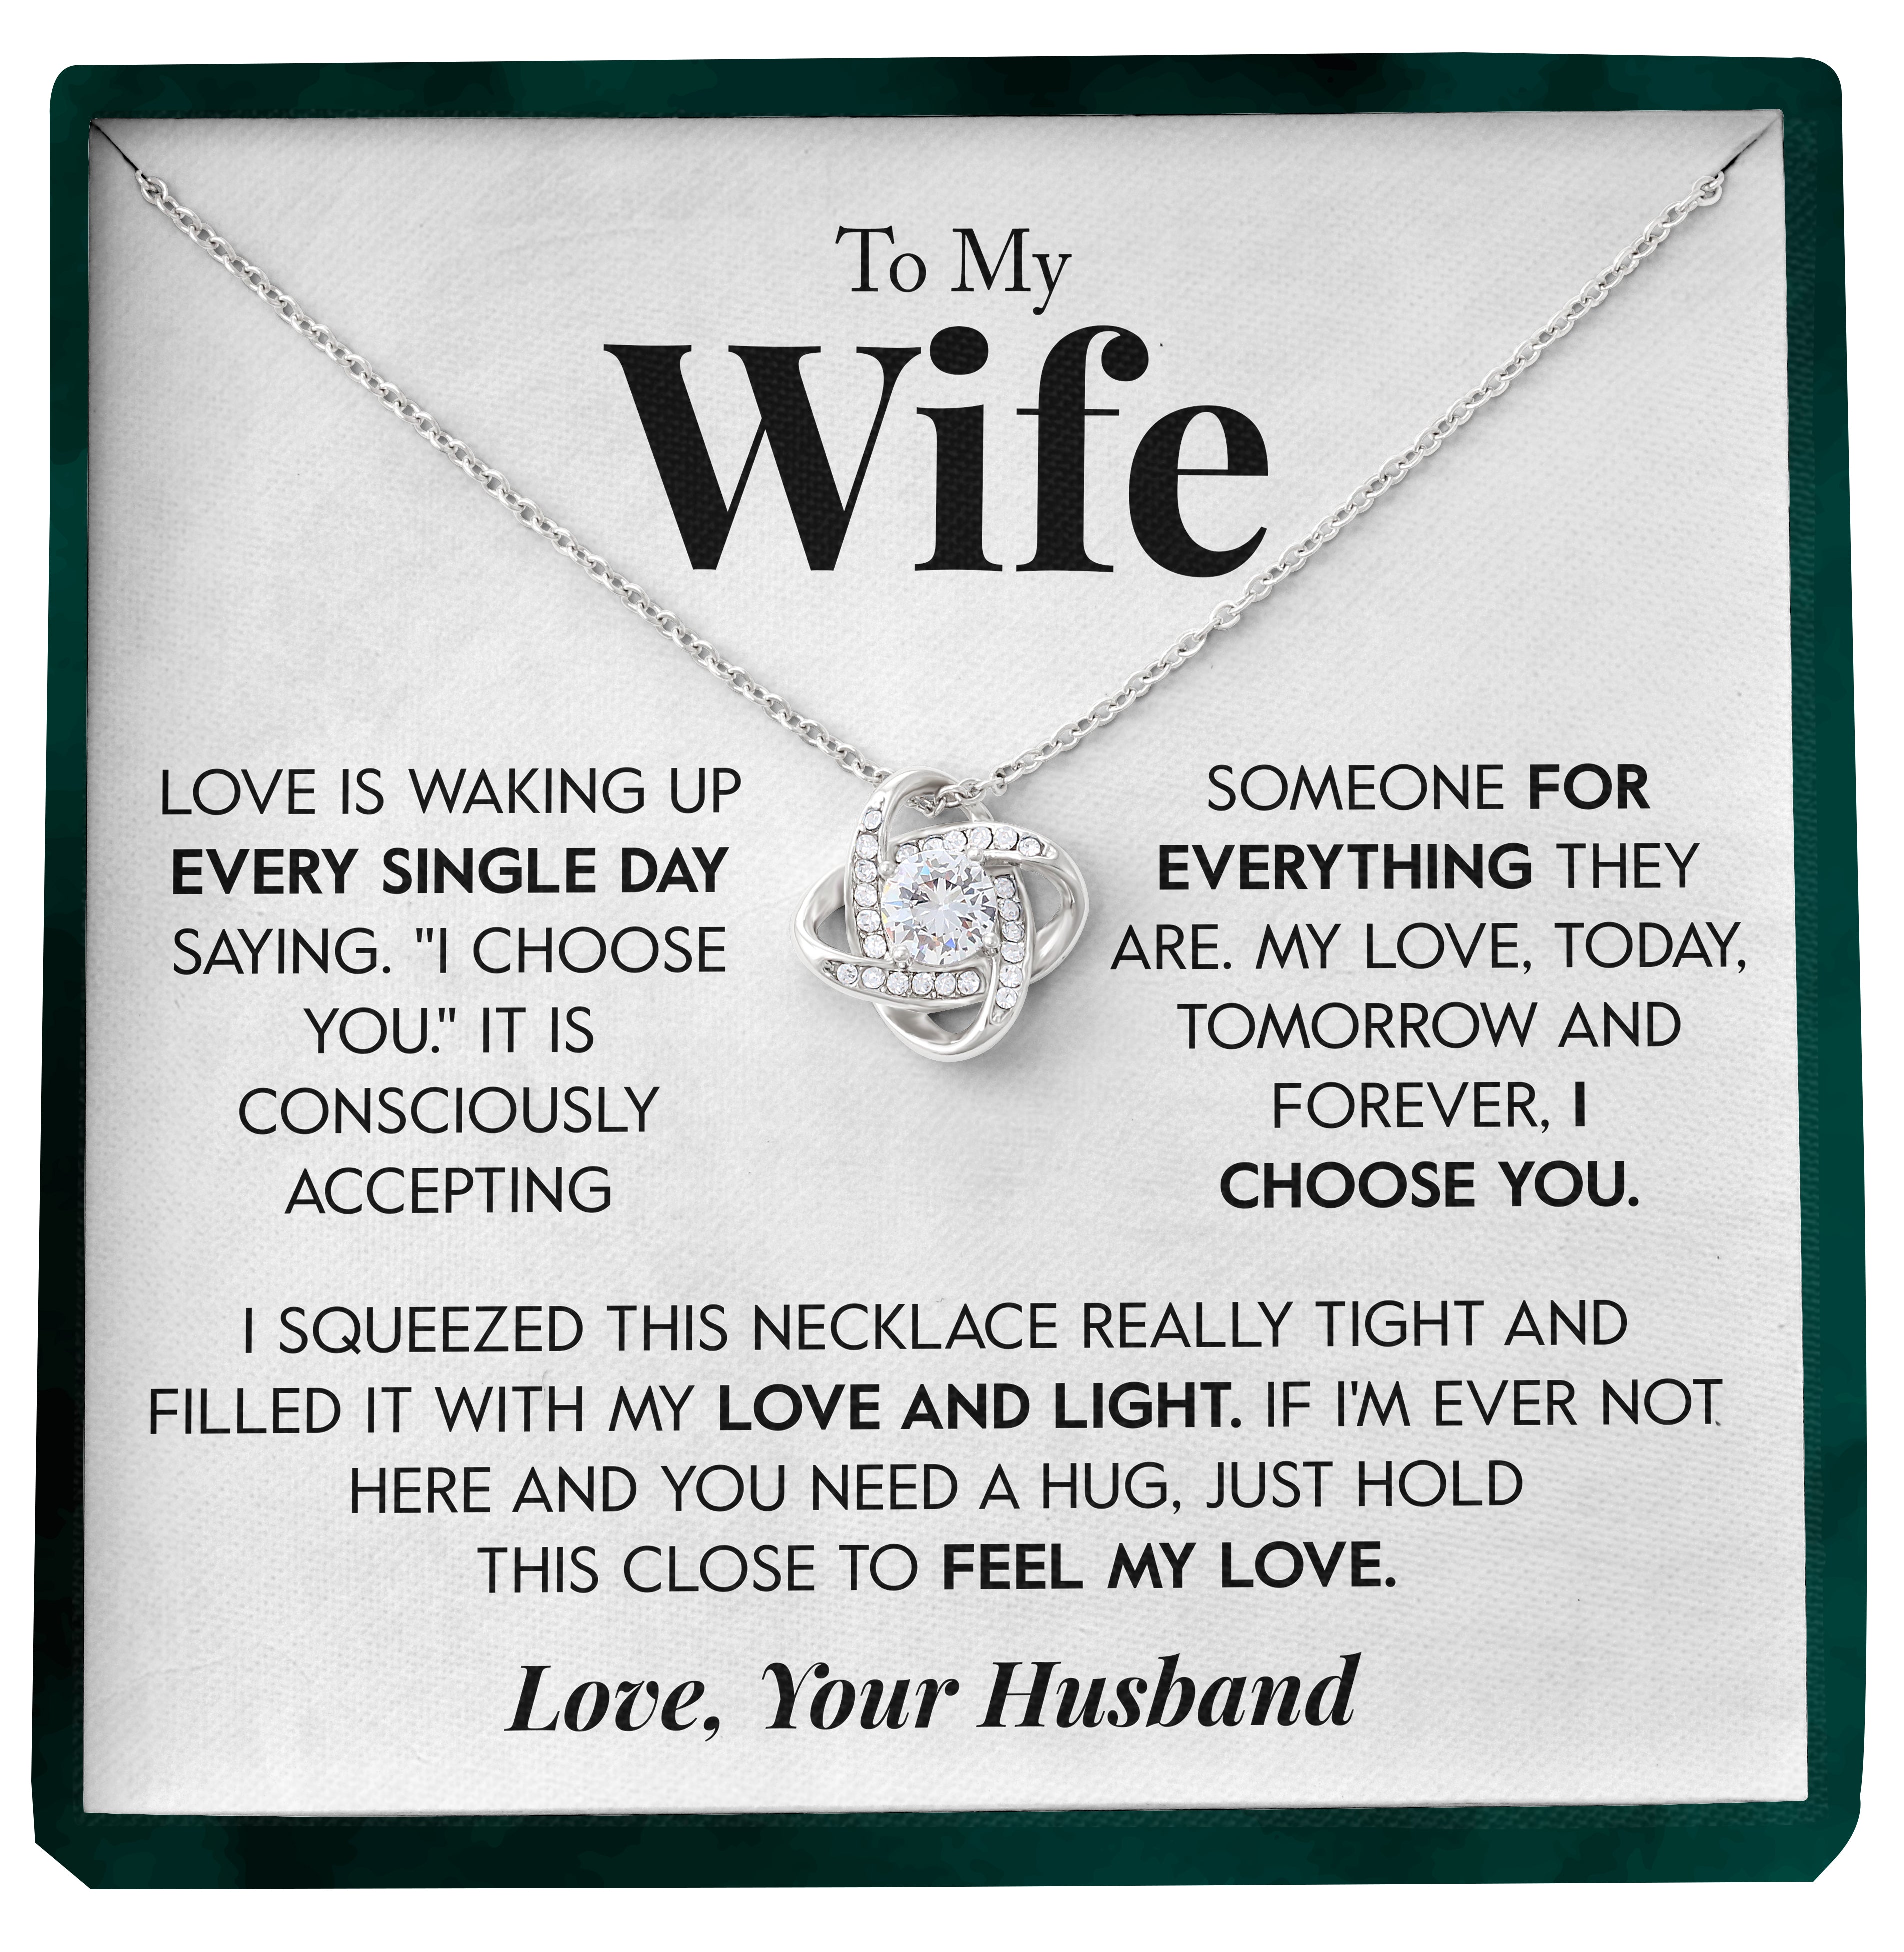 To My Wife | "Today, Tomorrow and Forever" | Love Knot Necklace